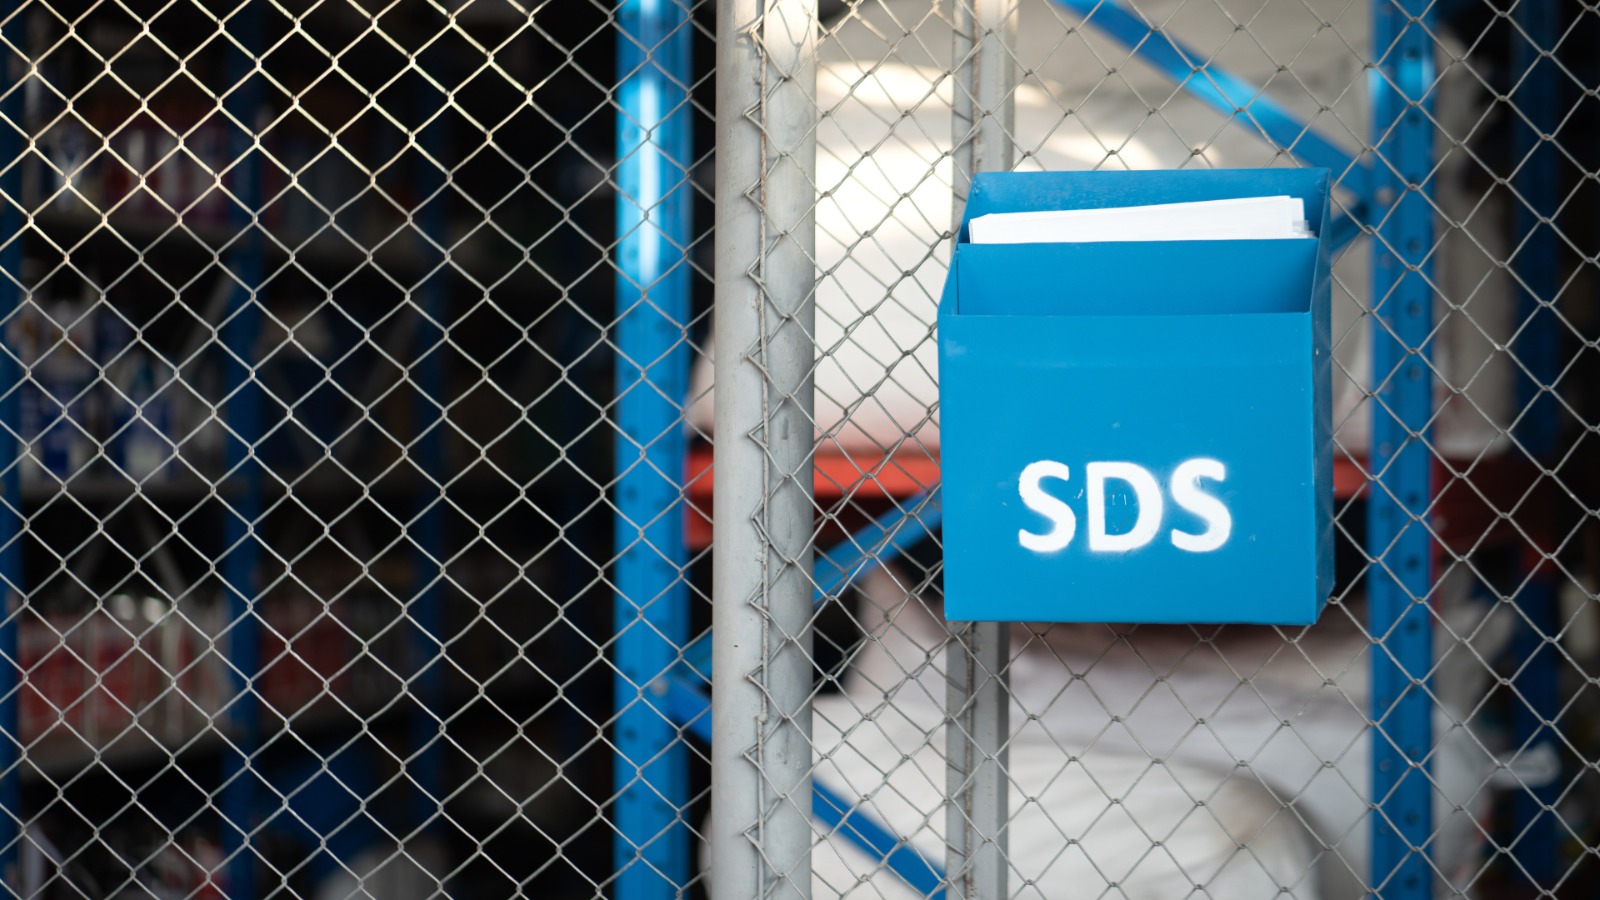 Do You Have the Correct SDS for Your Product?